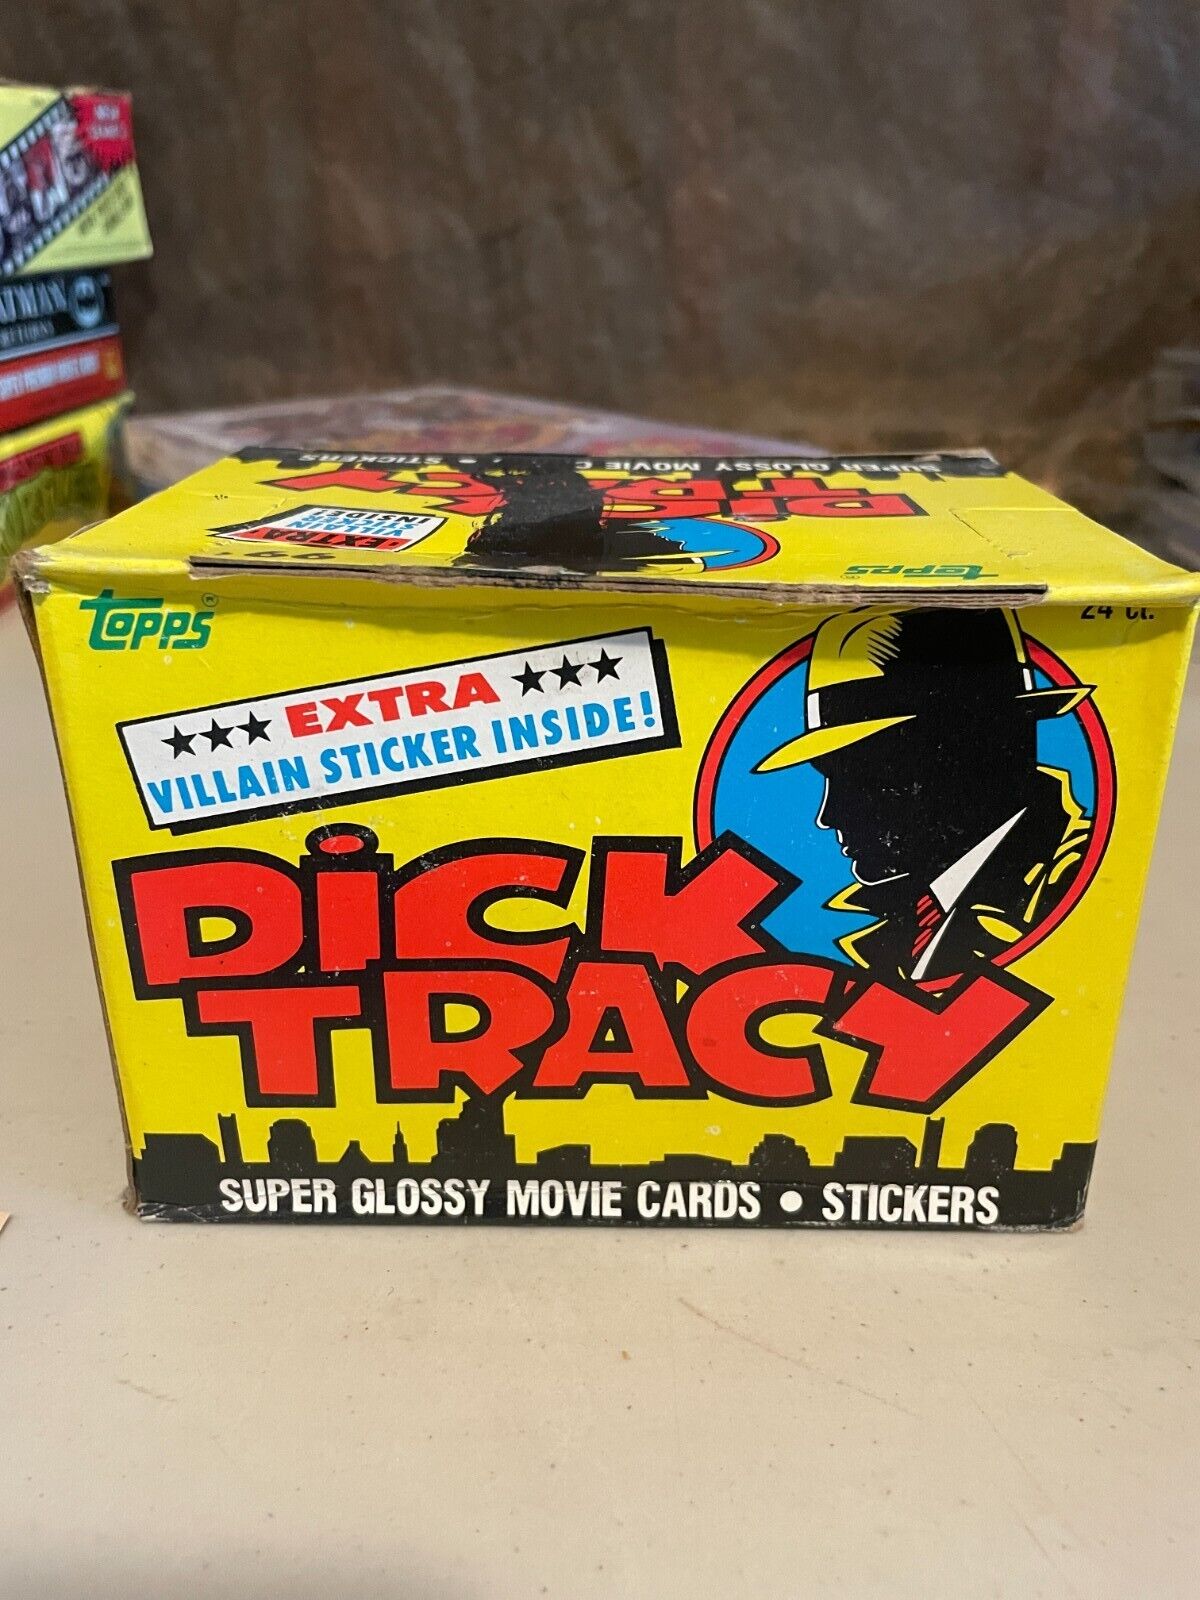 # 1990 Topps Dick Tracy Trading Card Box 24 Packs